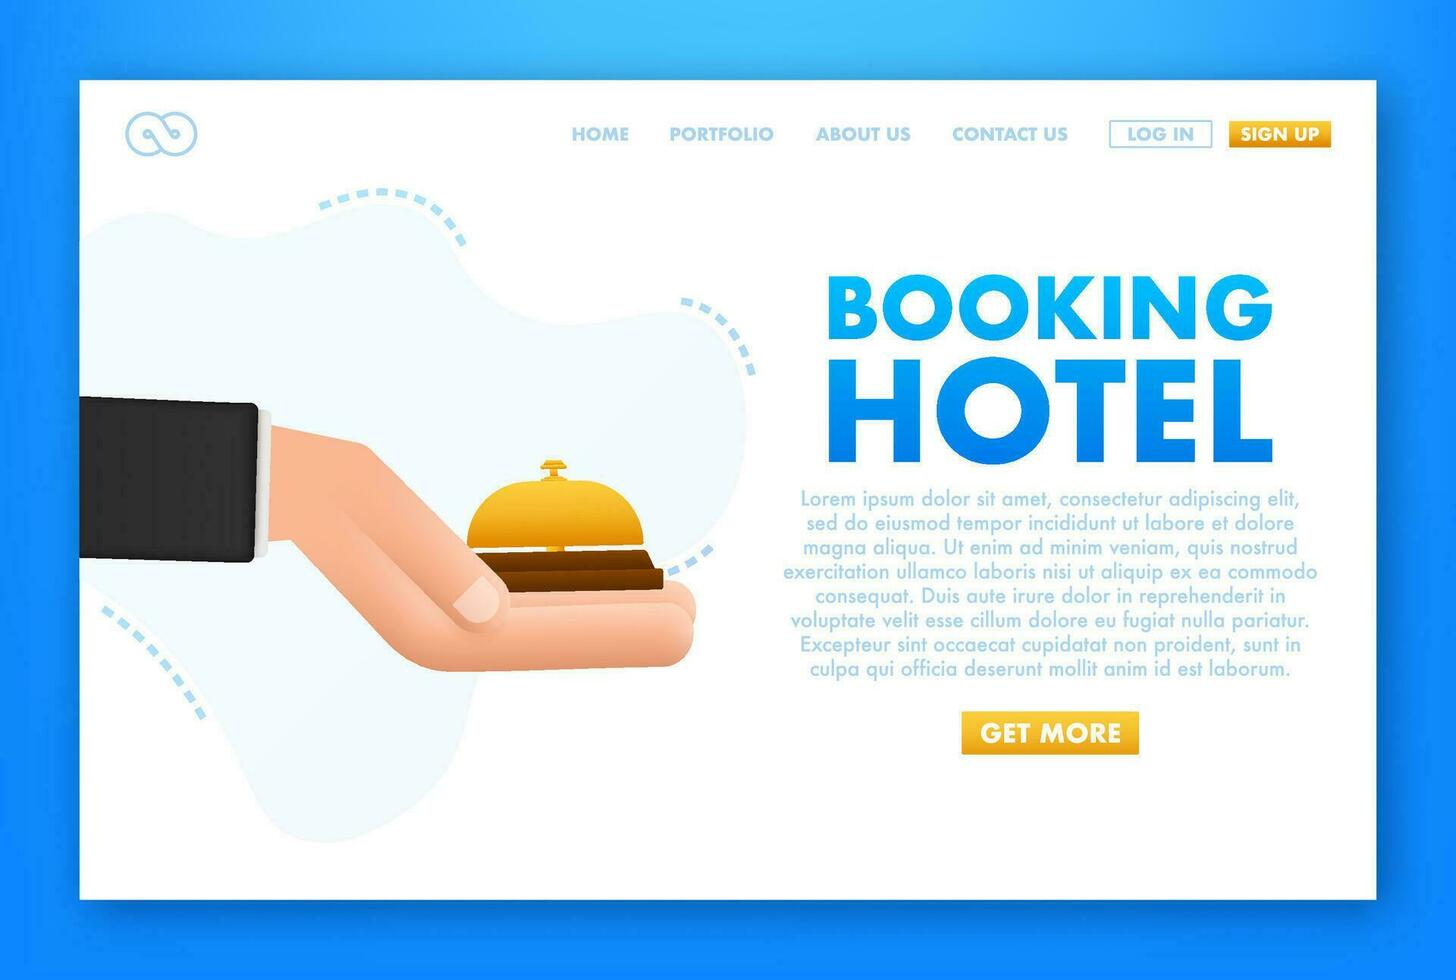 Booking hotel reception bell. Illustration vector graphic.